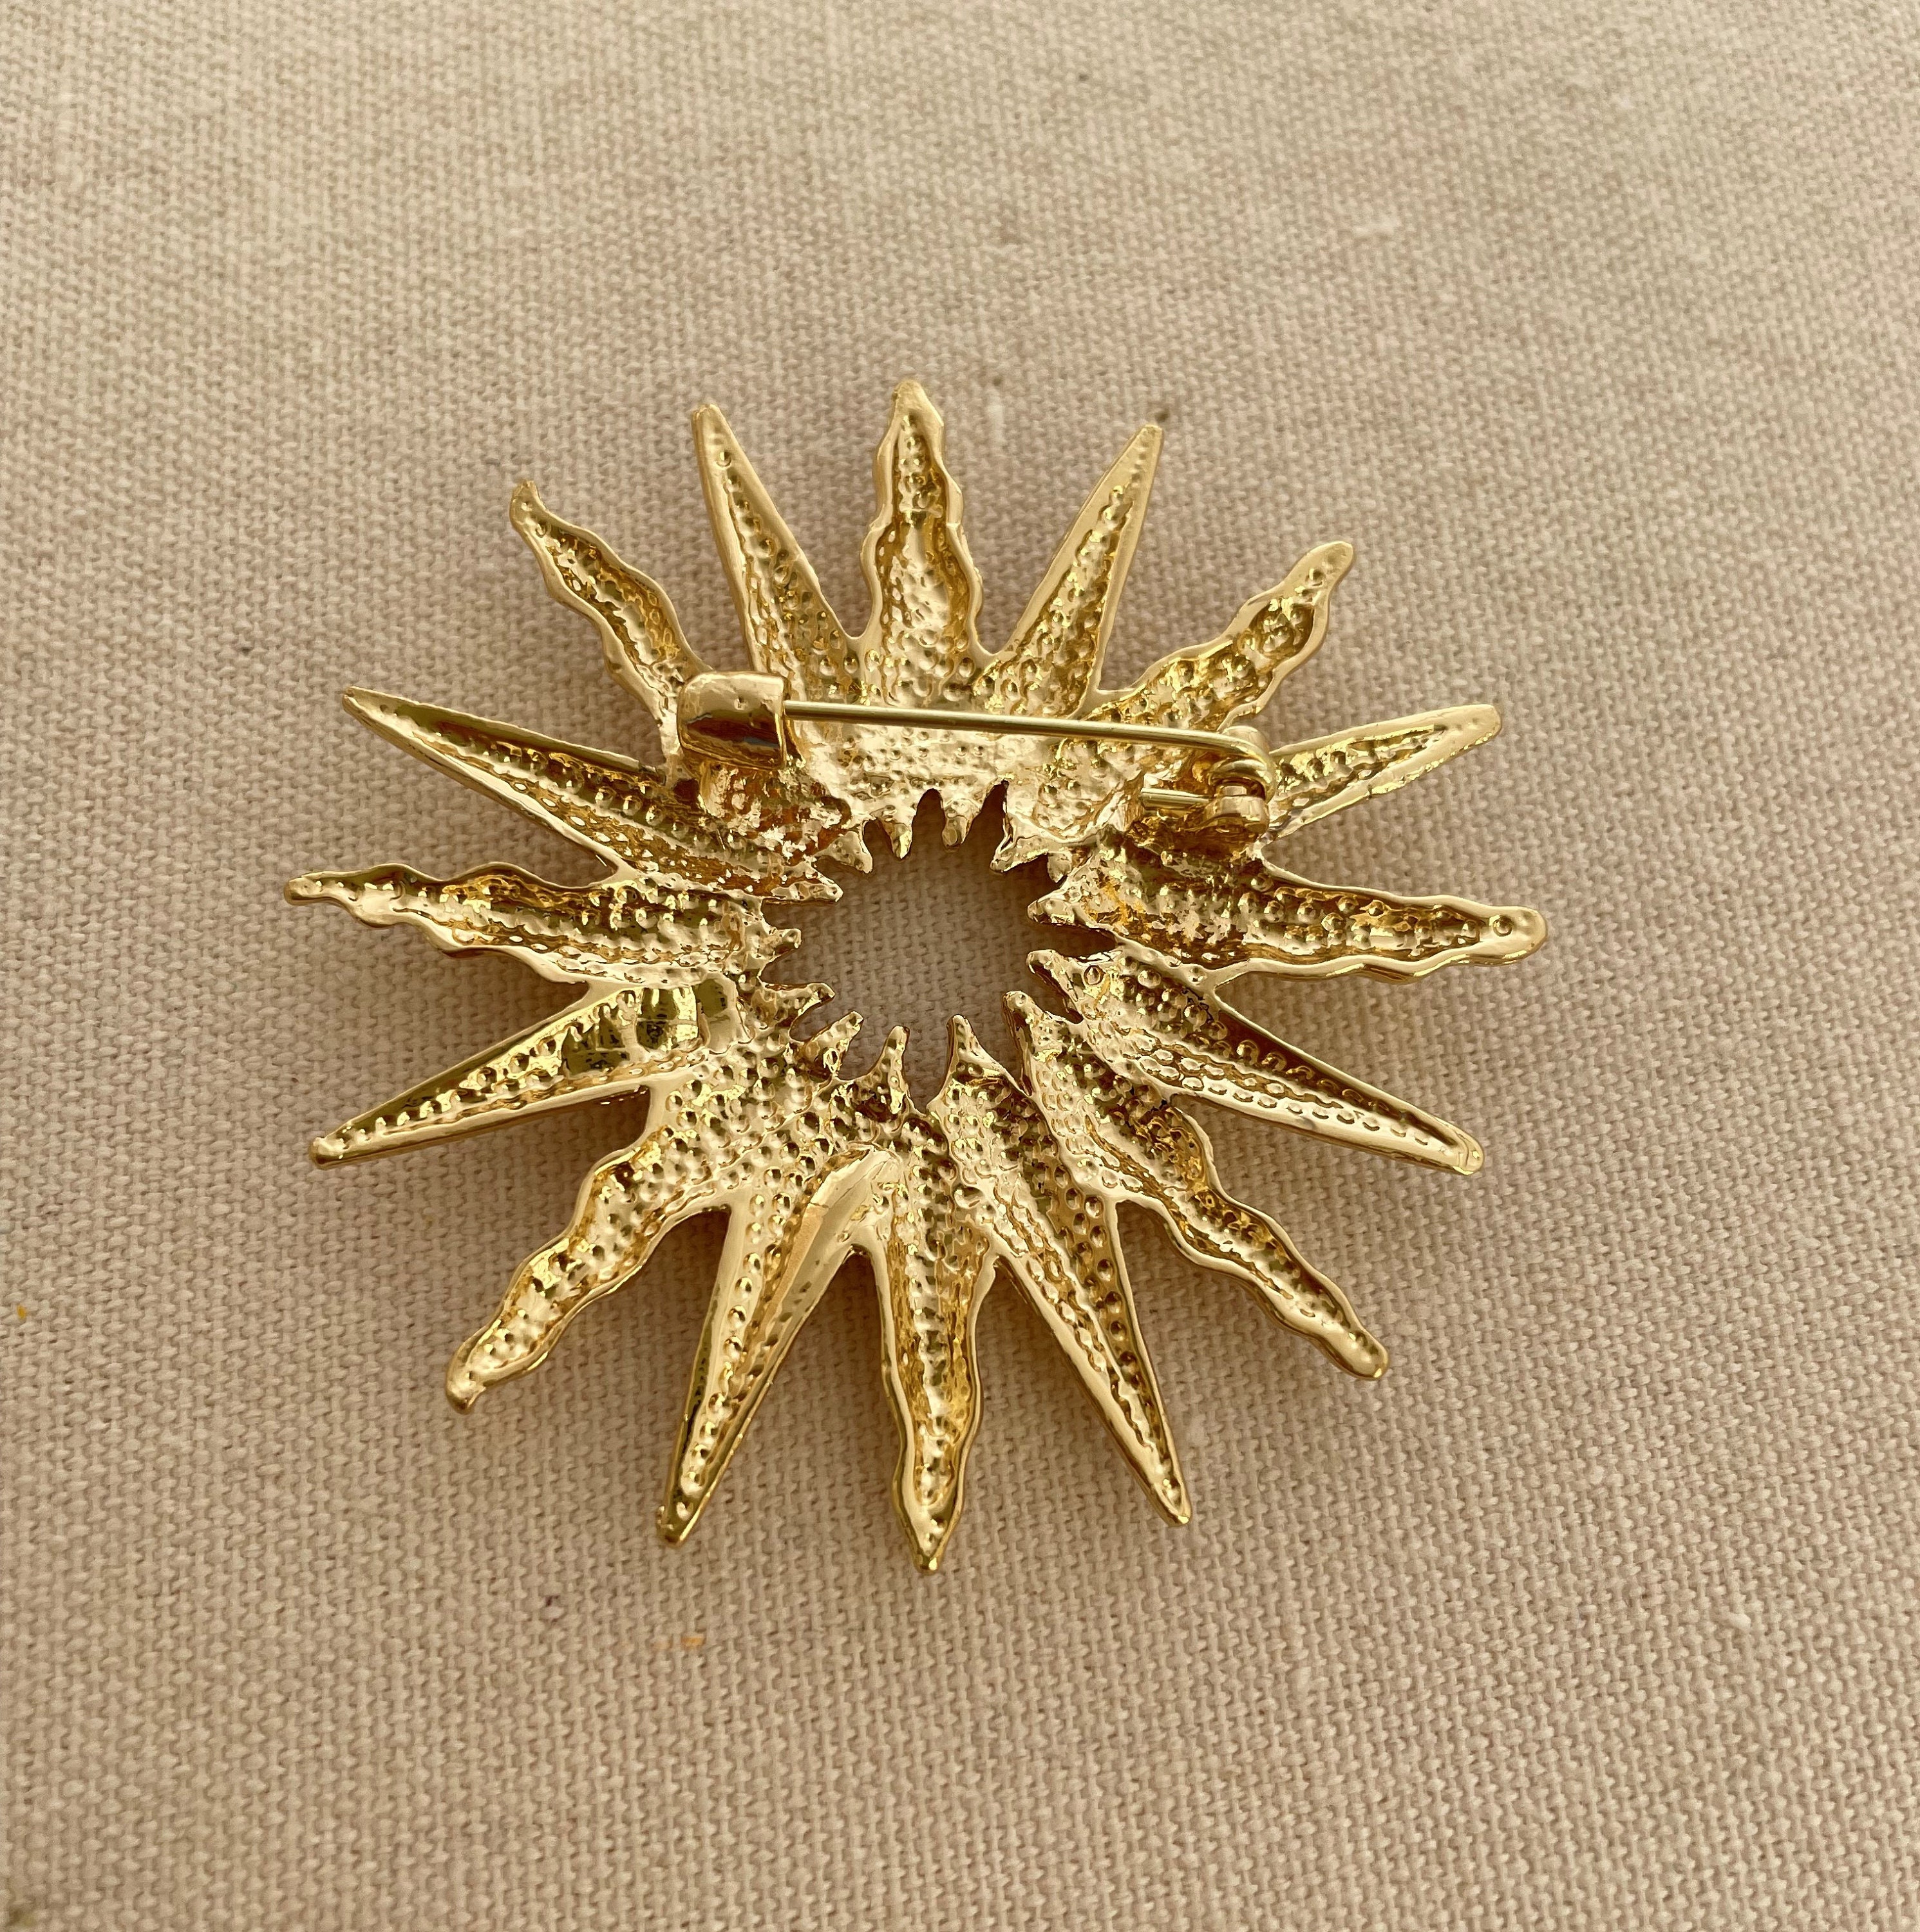 Dropship Dainty Sun And Stars Brooch Pin For Women Girls Delicate